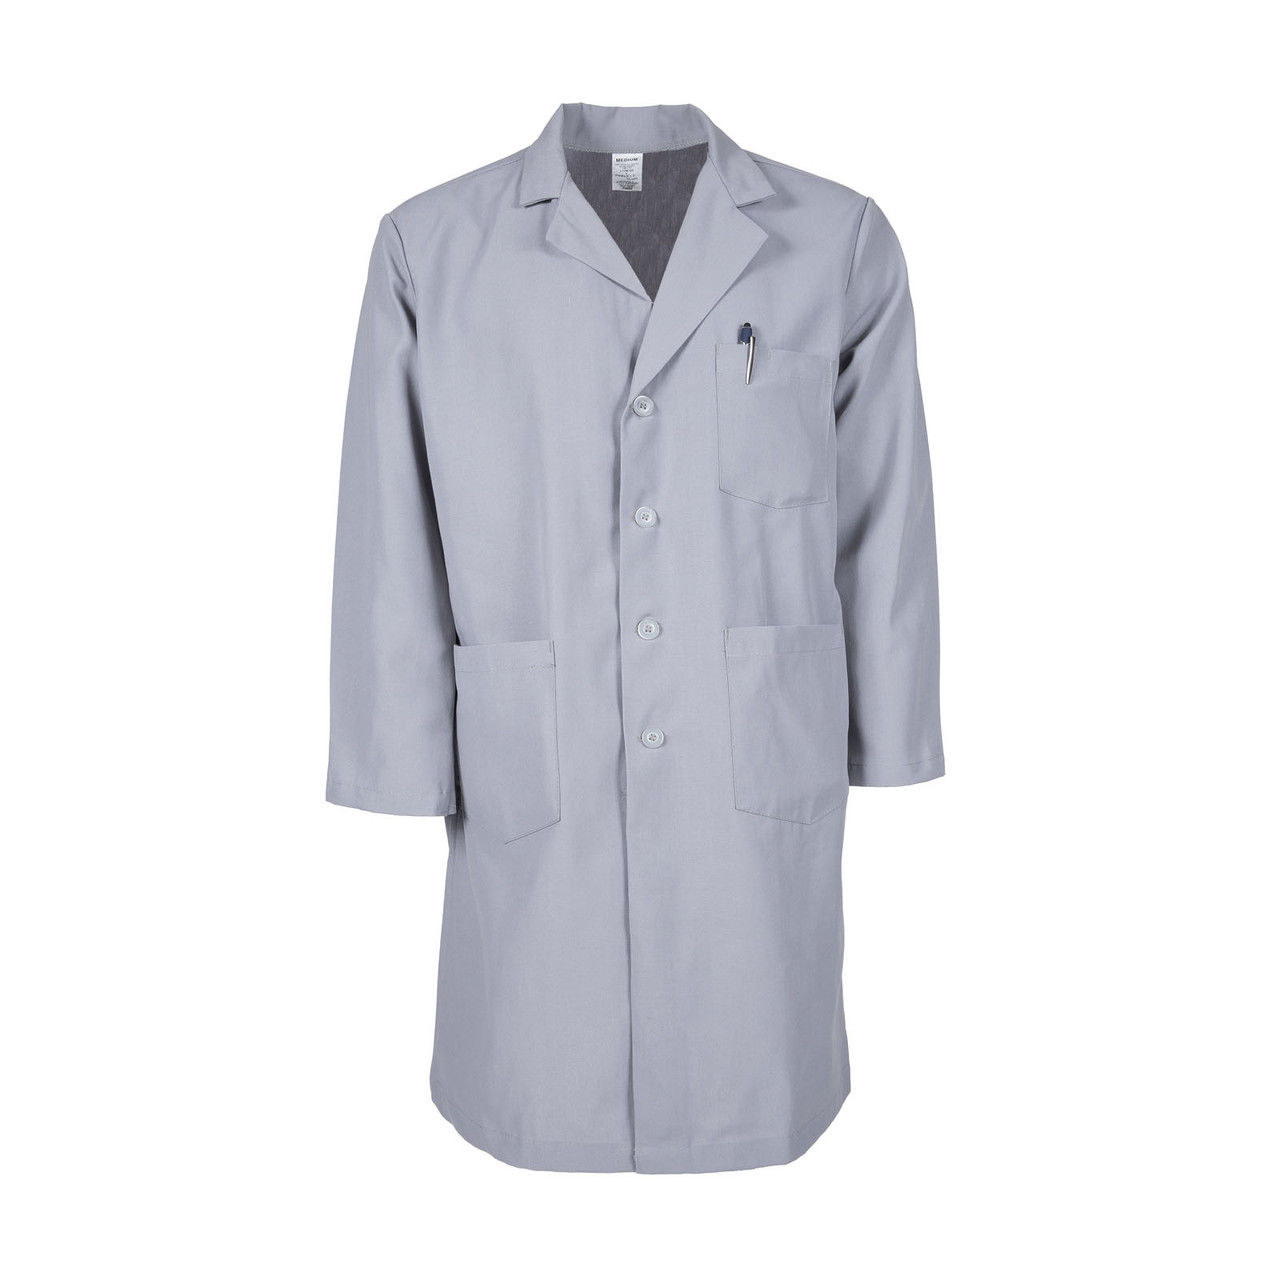 Could you tell me what material the grey lab coats for men are made of?